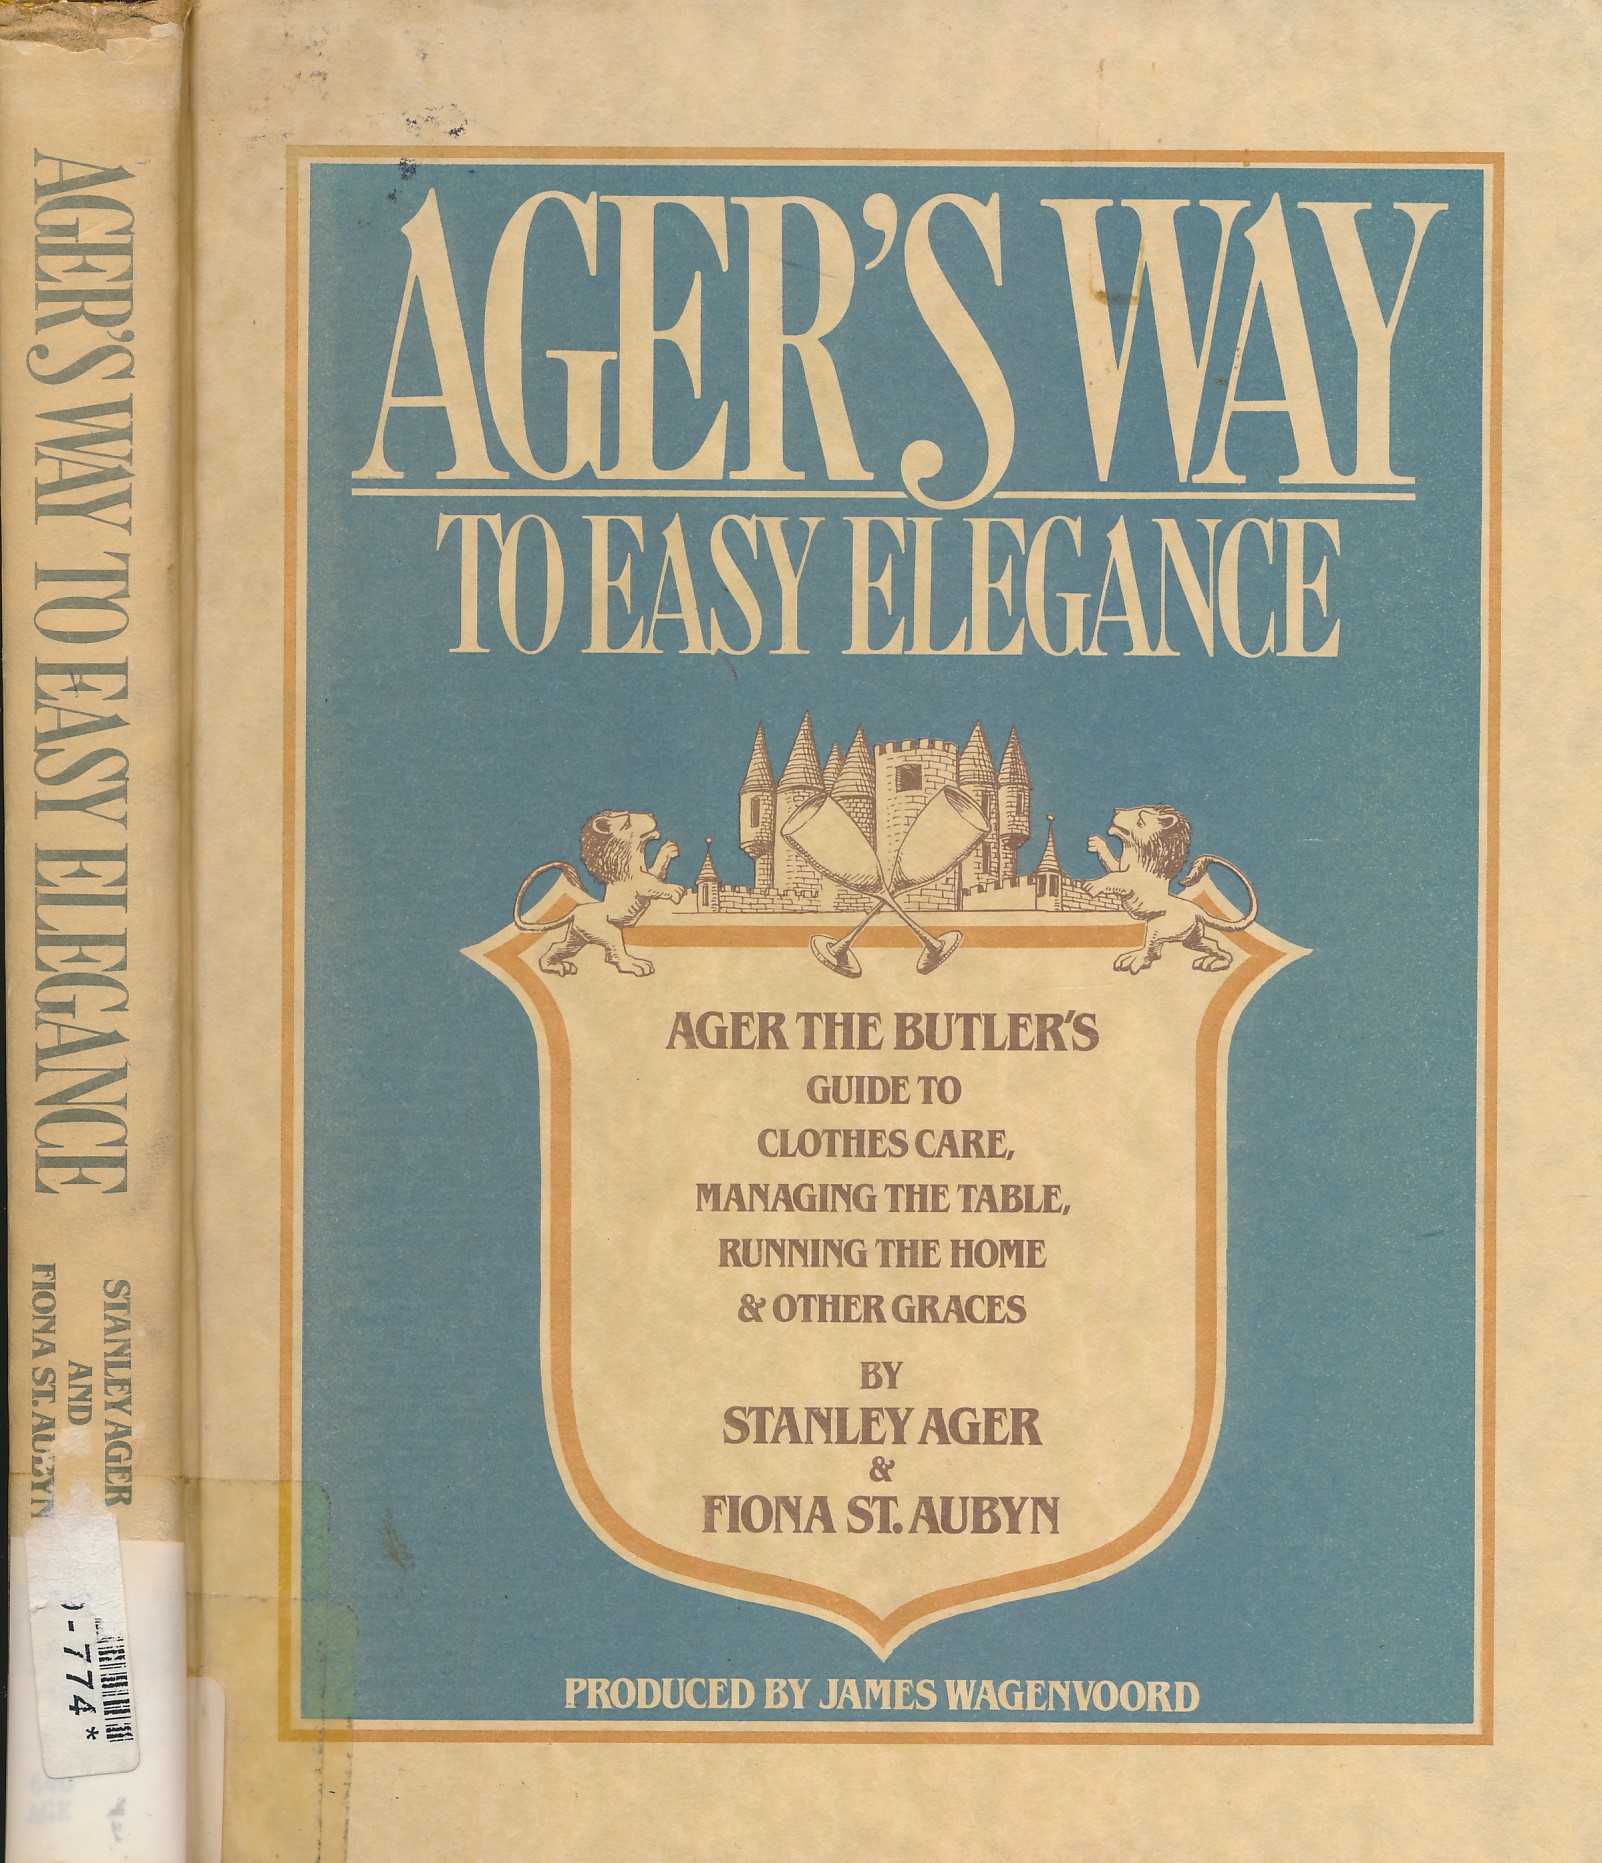 Ager's Way to Easy Elegance